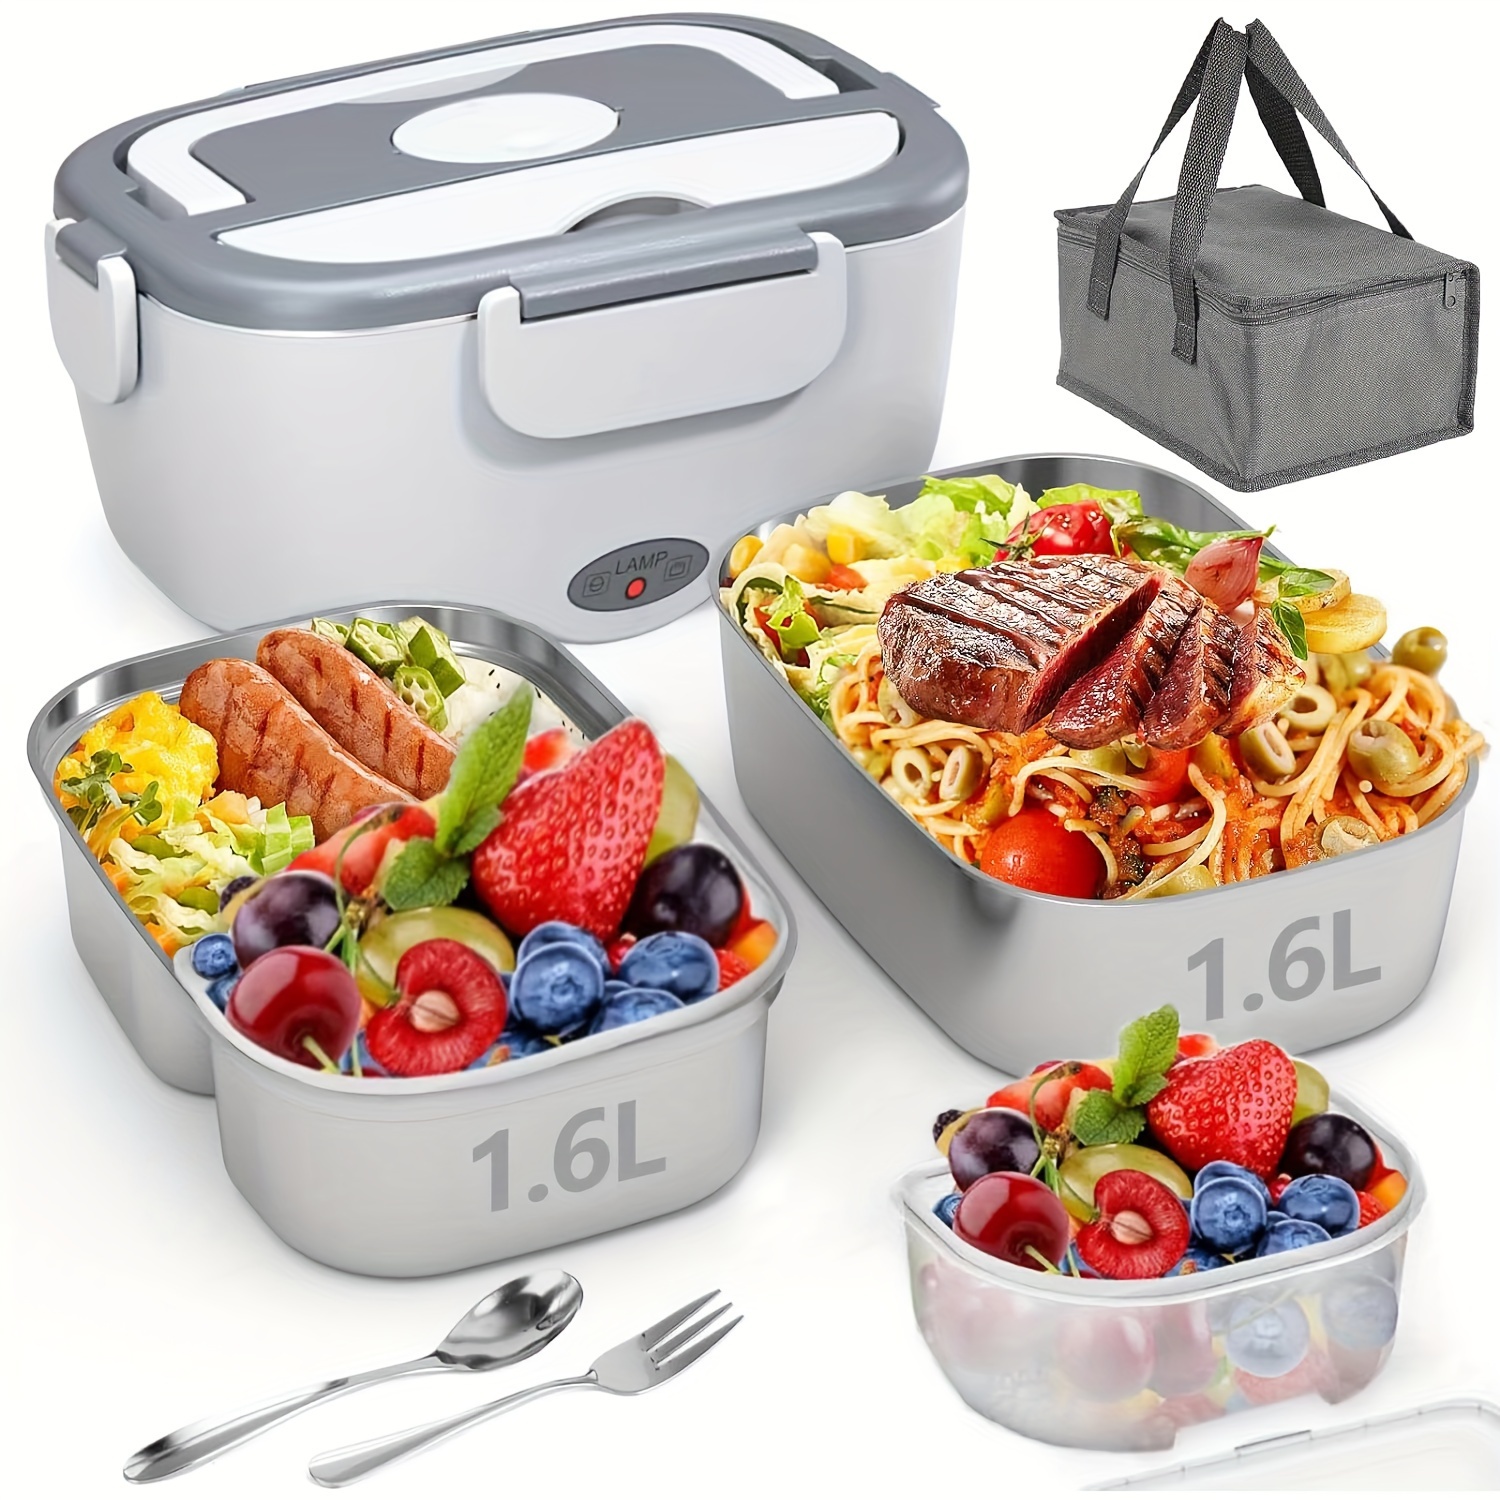 

Electric Lunch Box - Portable Fast Heating Lunch Box (12v/24v/110v) - 1.6l Stainless Steel Container Adult Food Warmer - Suitable For Cars, Trucks, Offices And Outdoors (white)